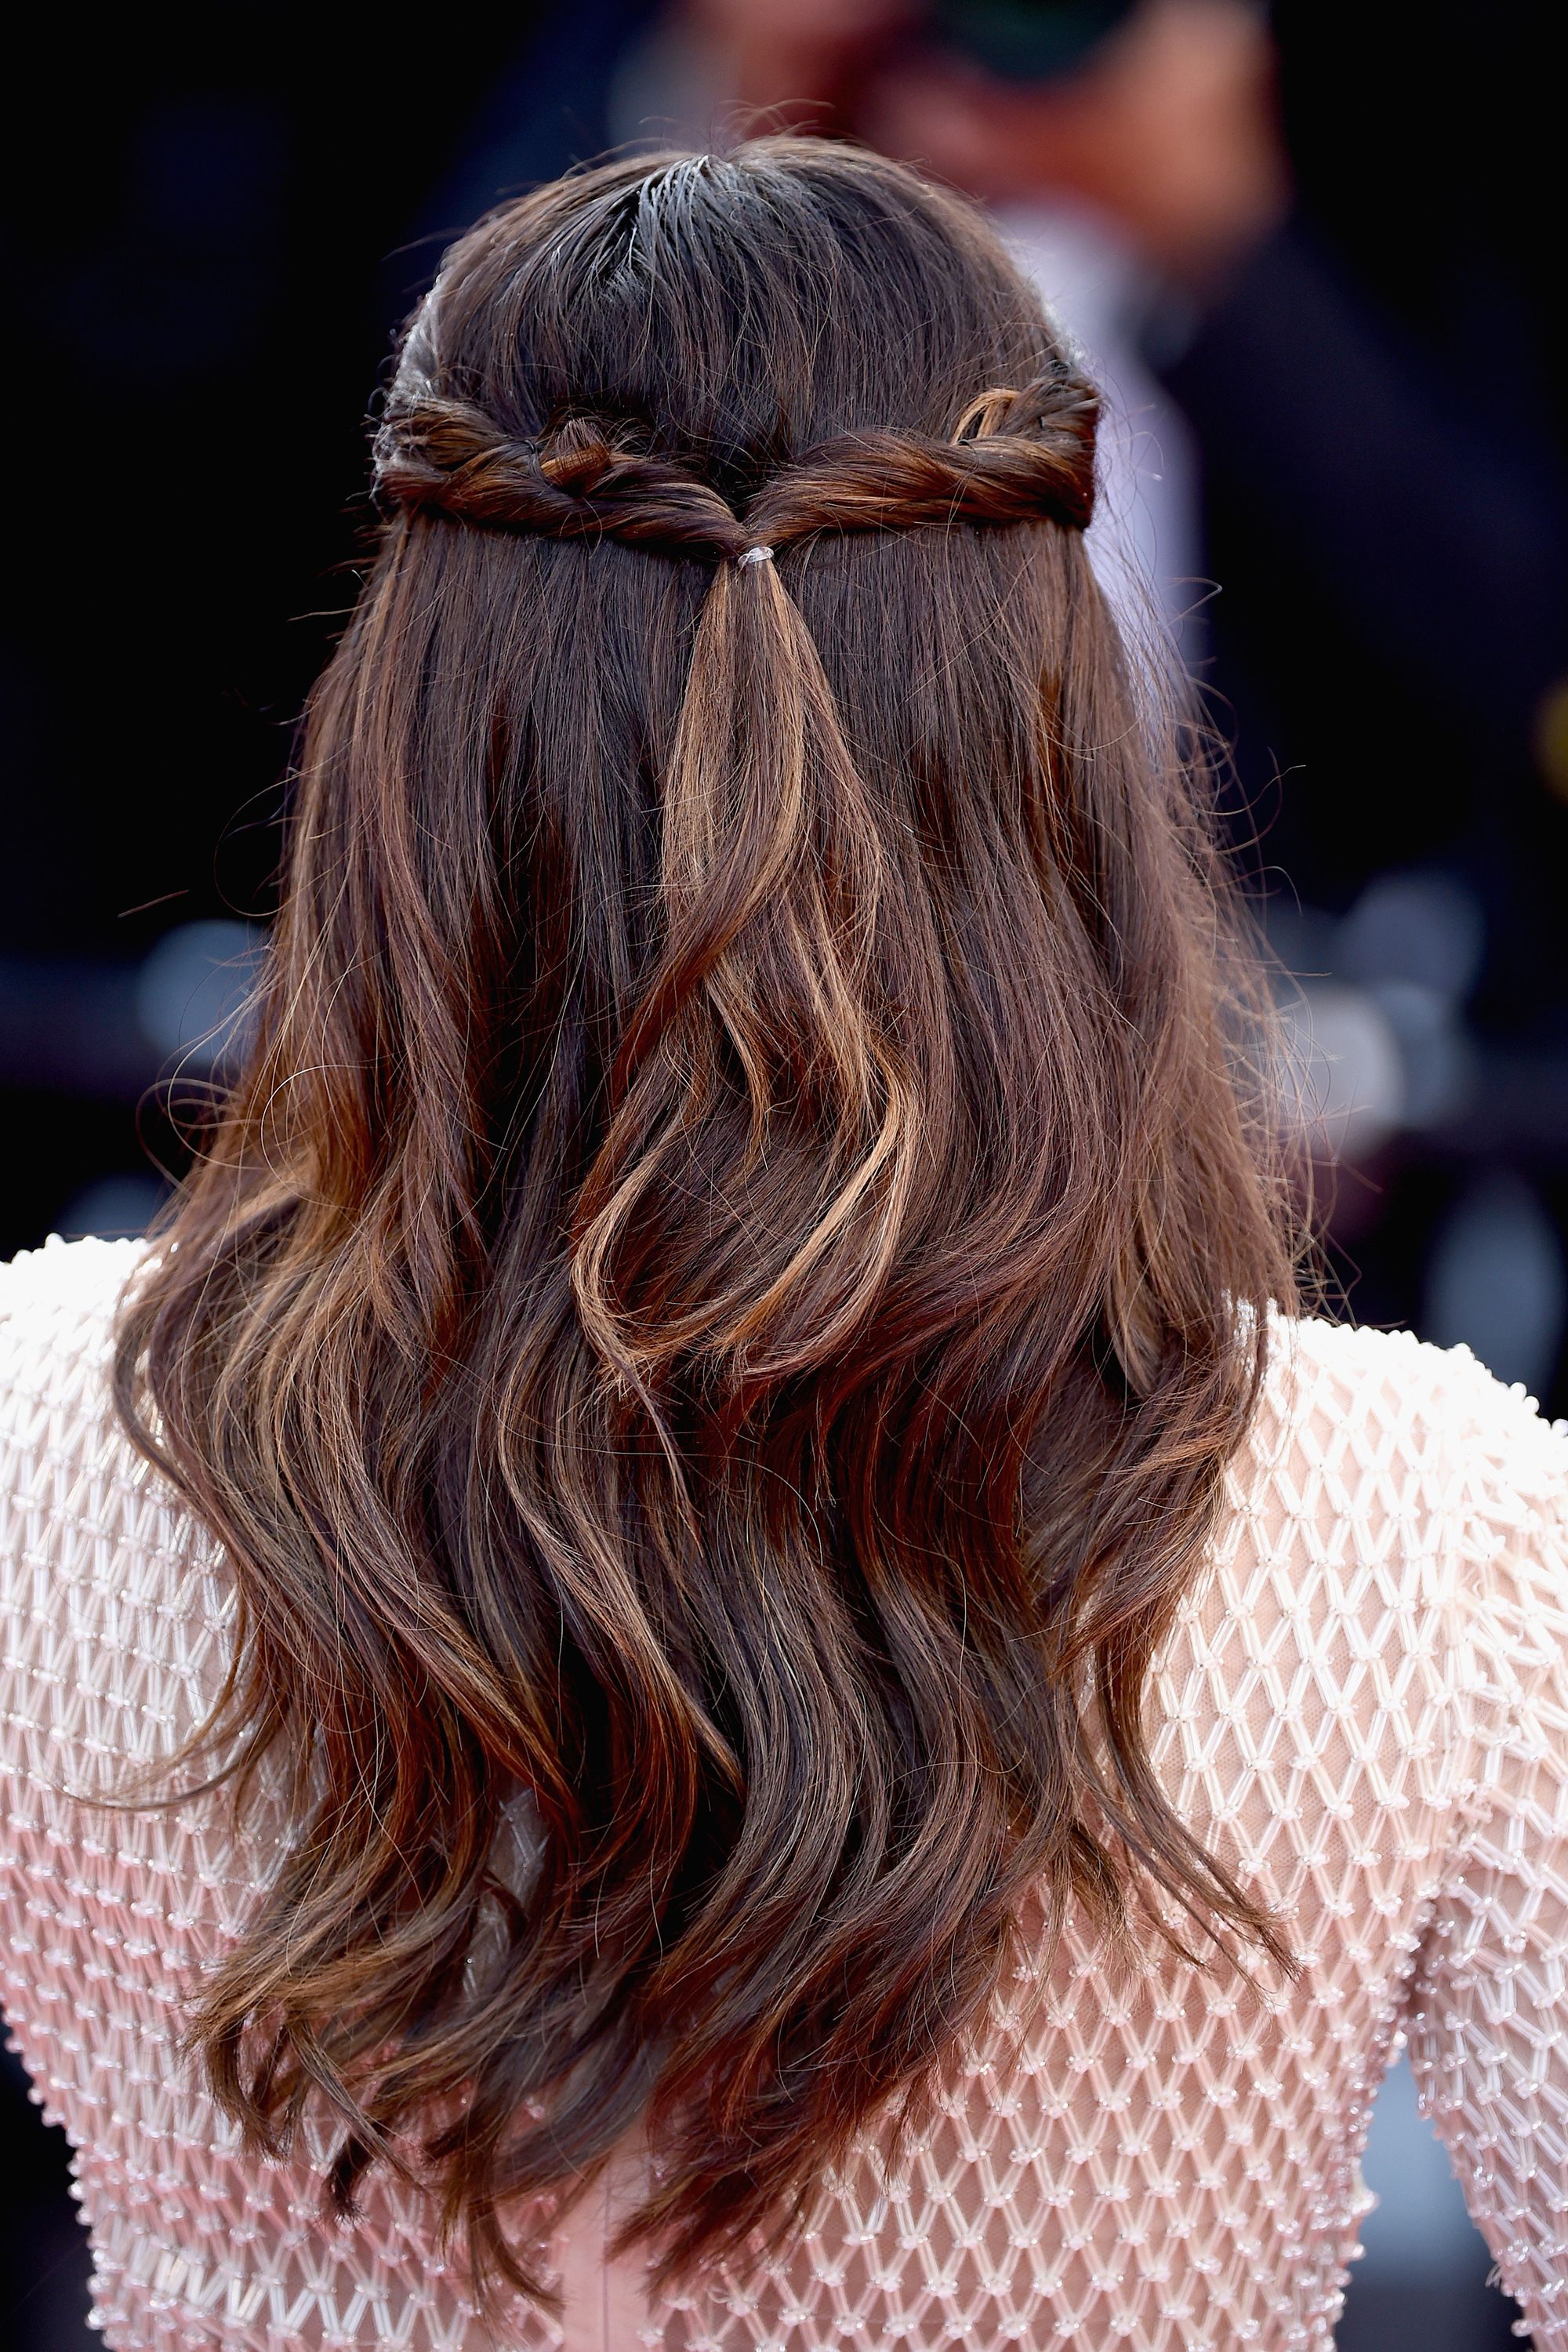 Festive party hair ideas - Hairstyle inspiration for party season